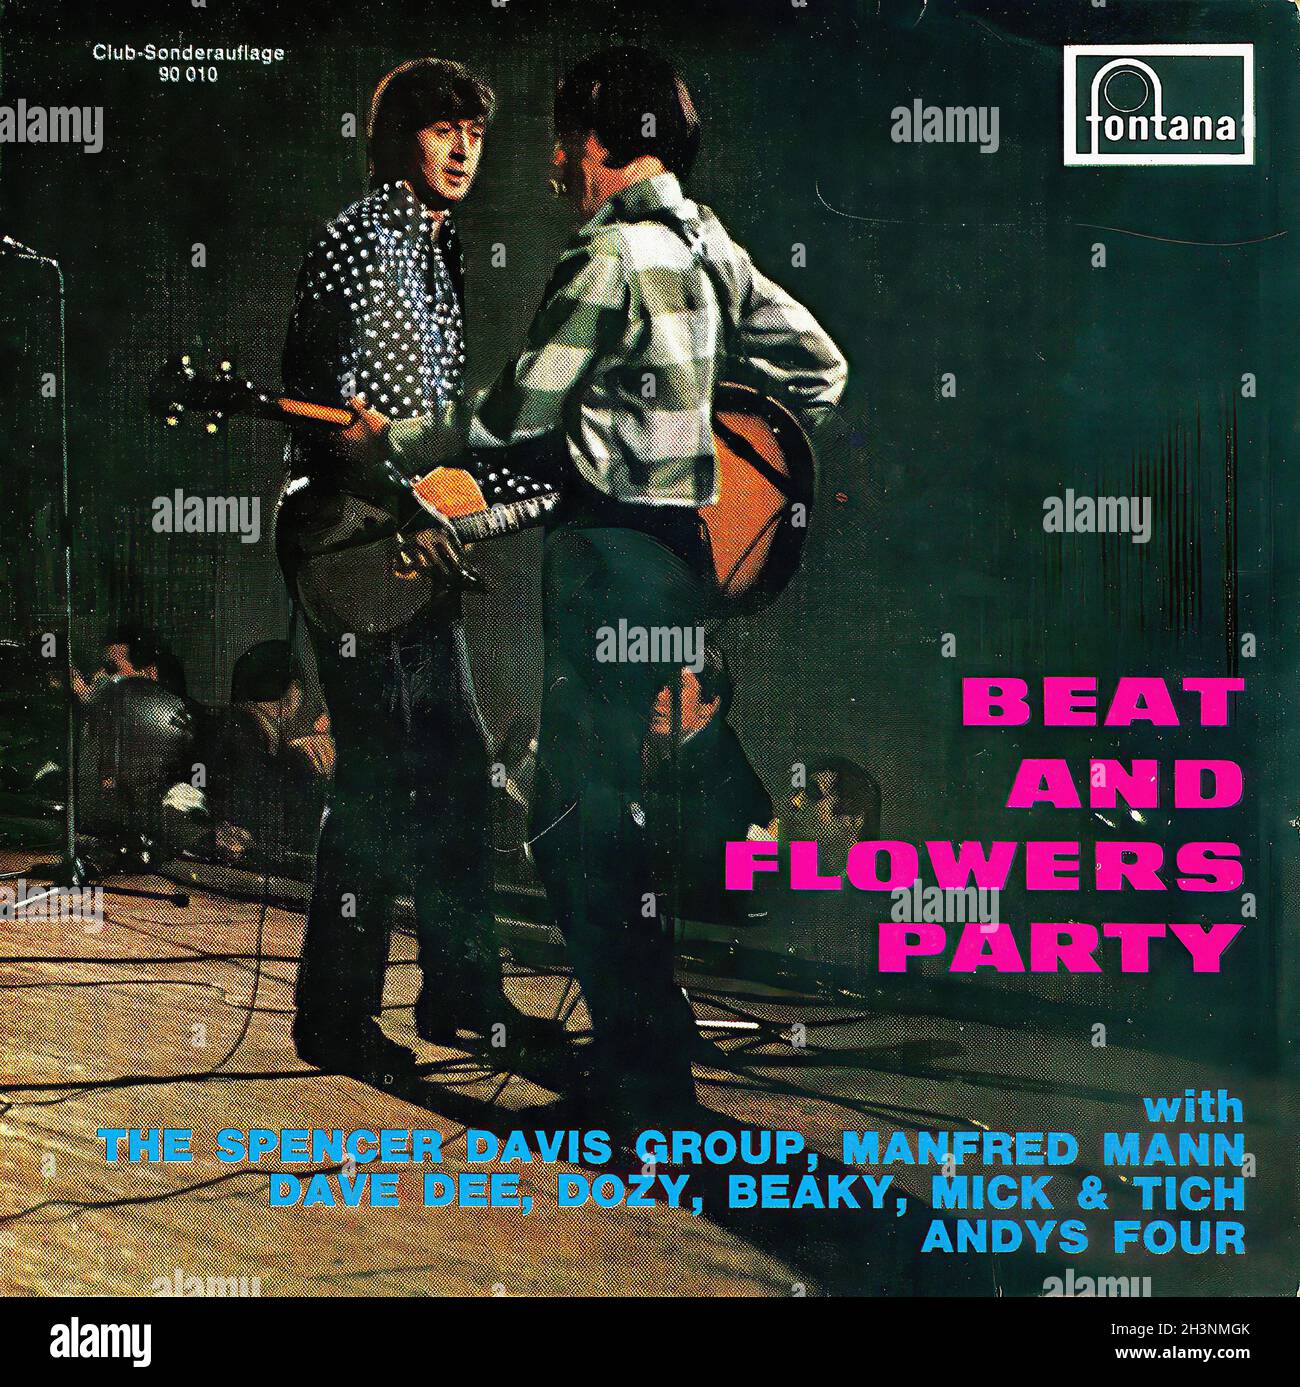 Vintage Vinyl Recording - Spencer Davis Group, The - Manfred Mann - Dave Dee, Dozy Beaky, Mick & Tich - Andy's Four - Beat and Flowers Party - Austria - 1967 Foto Stock